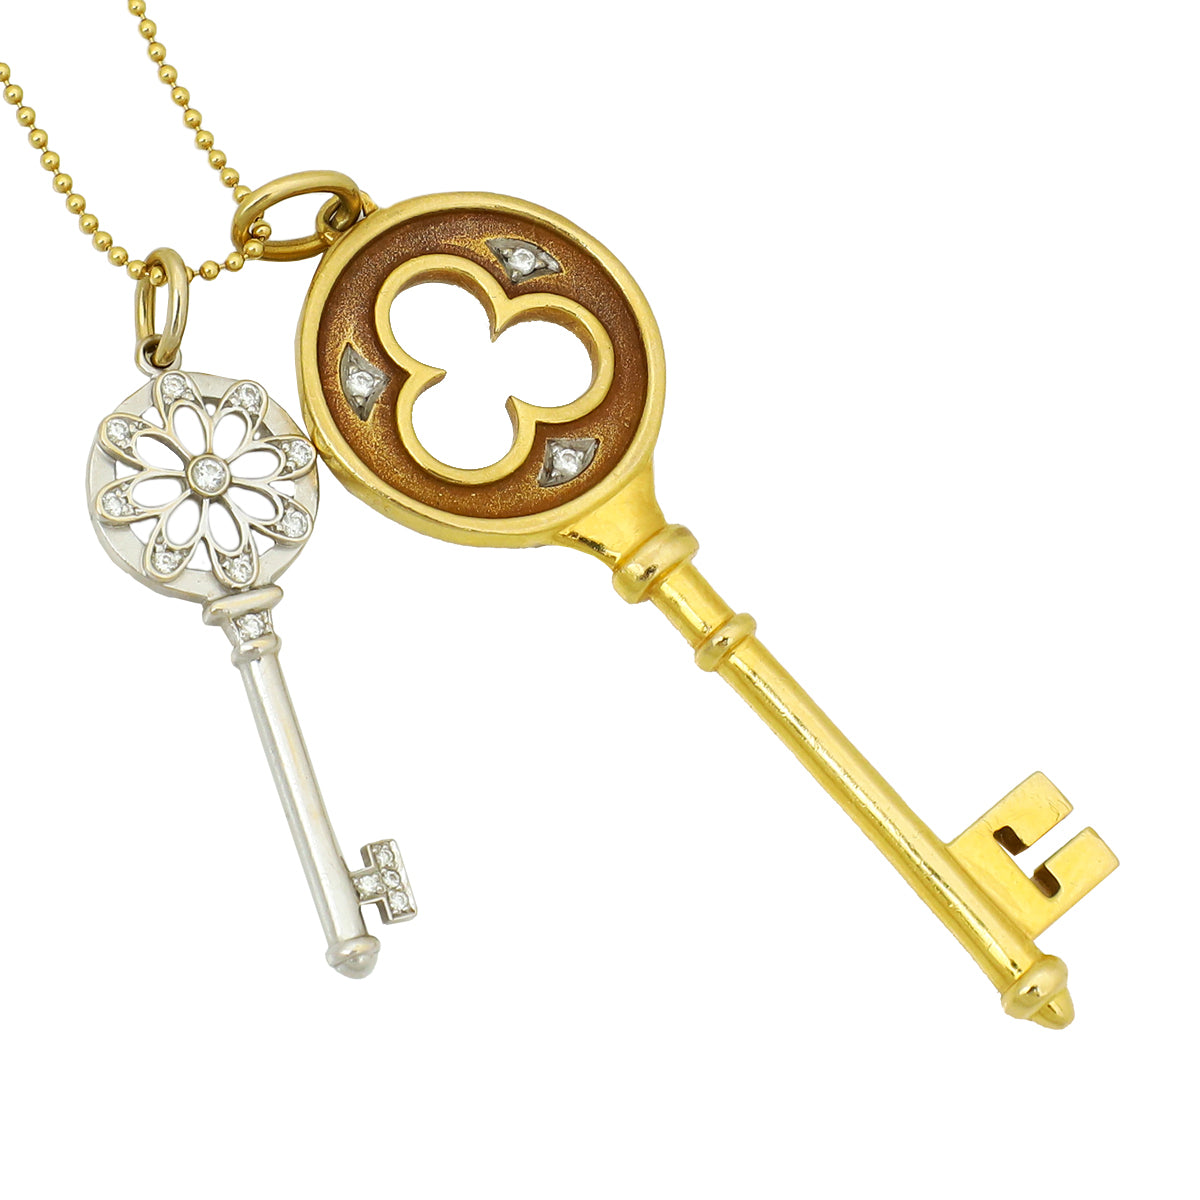 Tiffany & Co Yellow Gold Clover Key & Floral Key Pendant W/ Beaded Chain Necklace